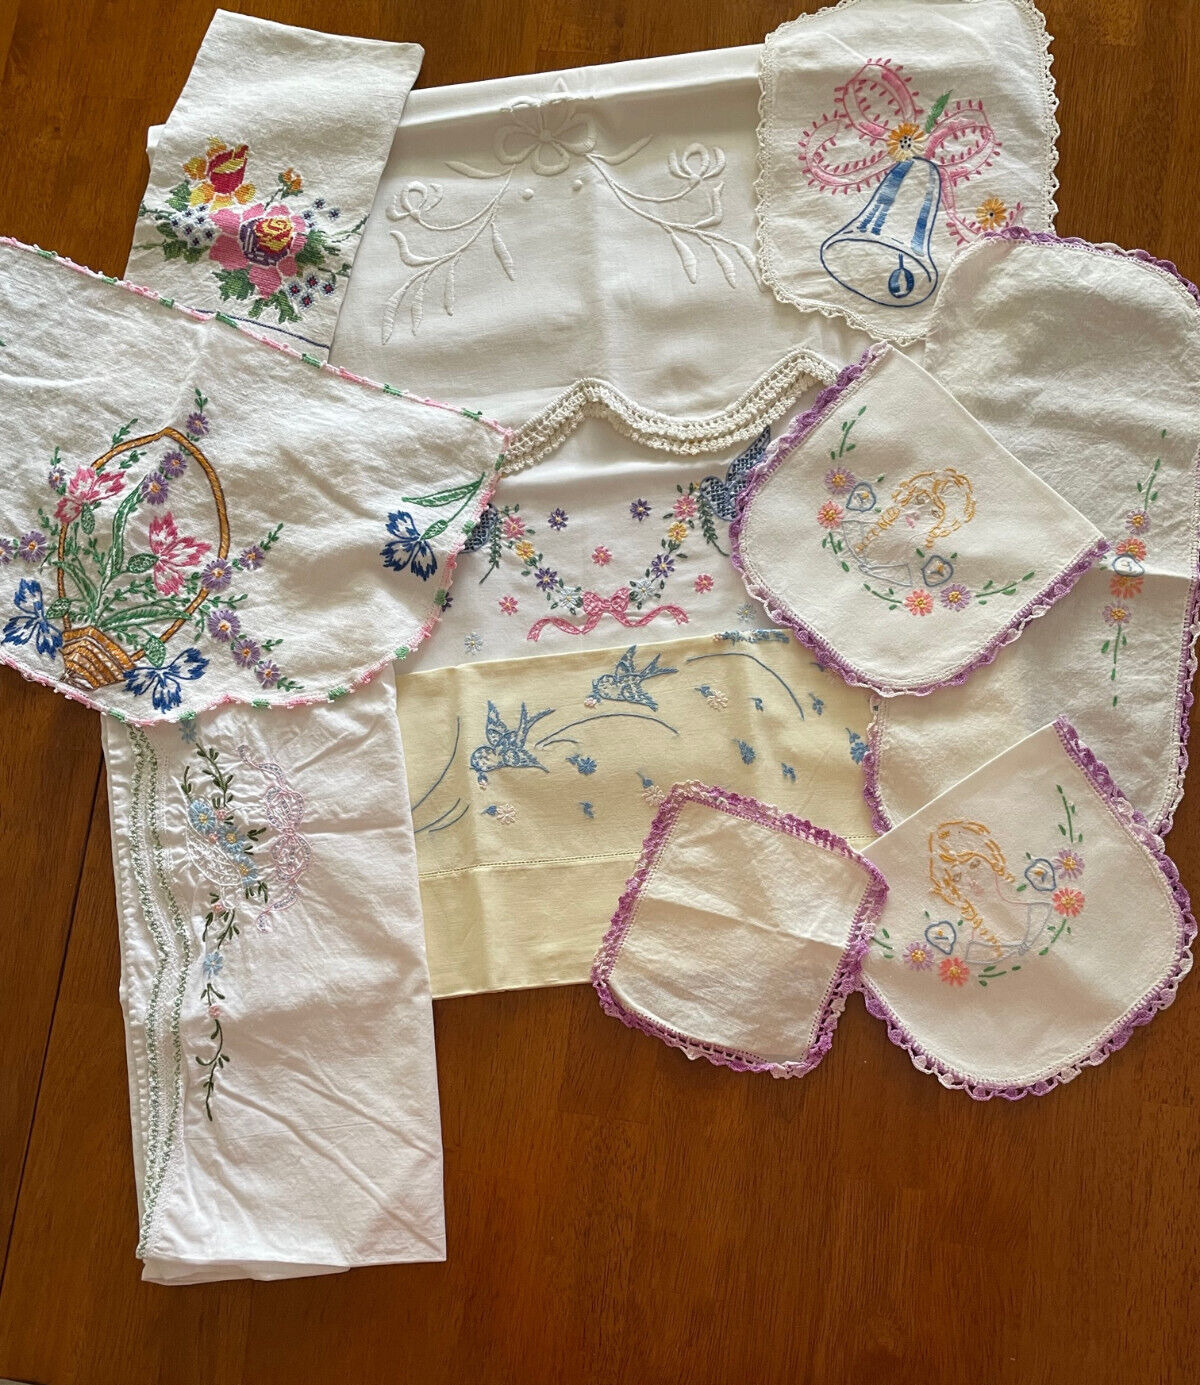  Lot of 11 Mixed Cotton Embroidered Crocheted Pillowcases Doilies Table Runner